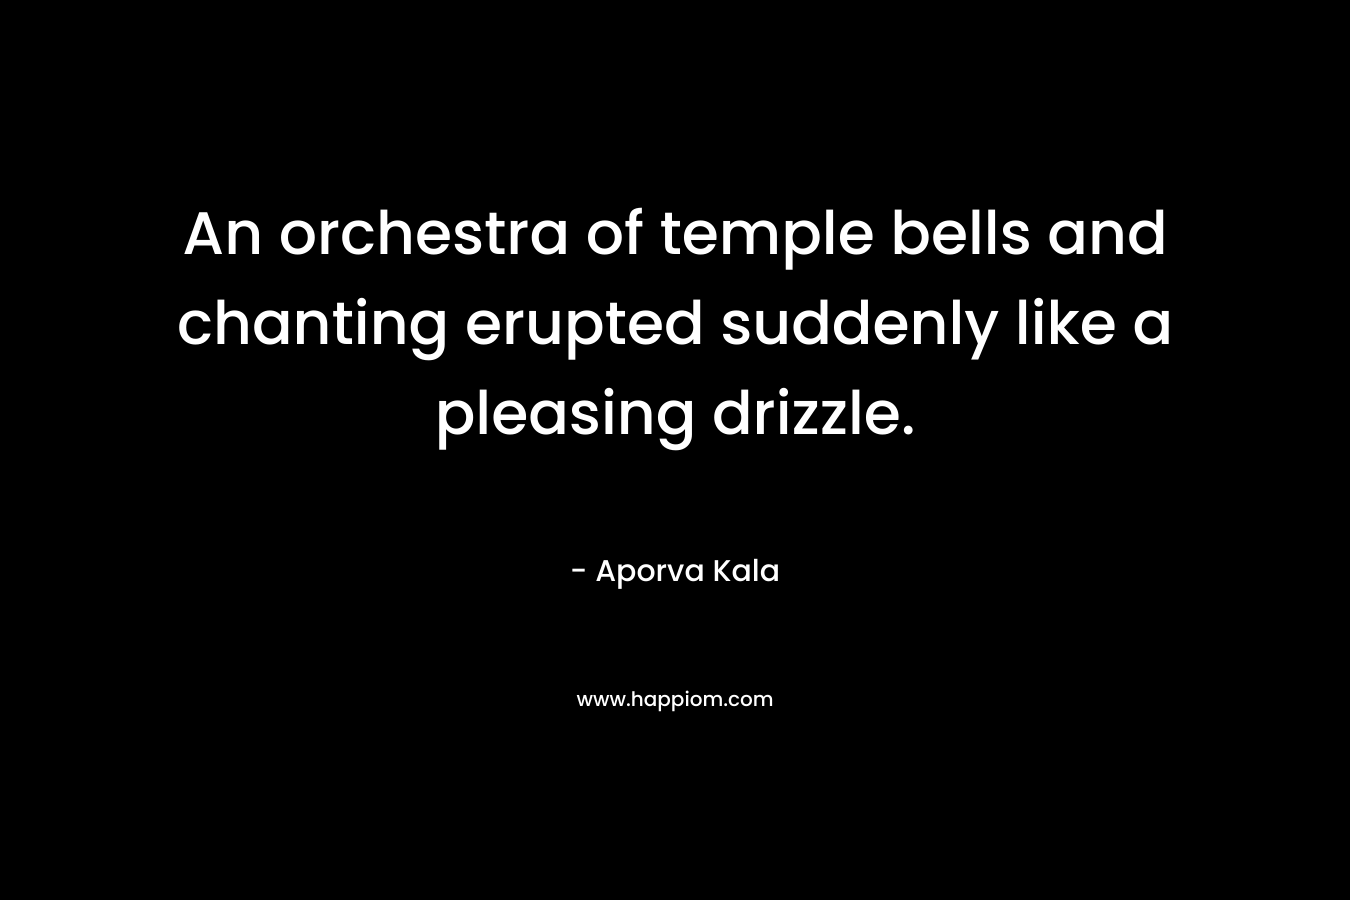 An orchestra of temple bells and chanting erupted suddenly like a pleasing drizzle.